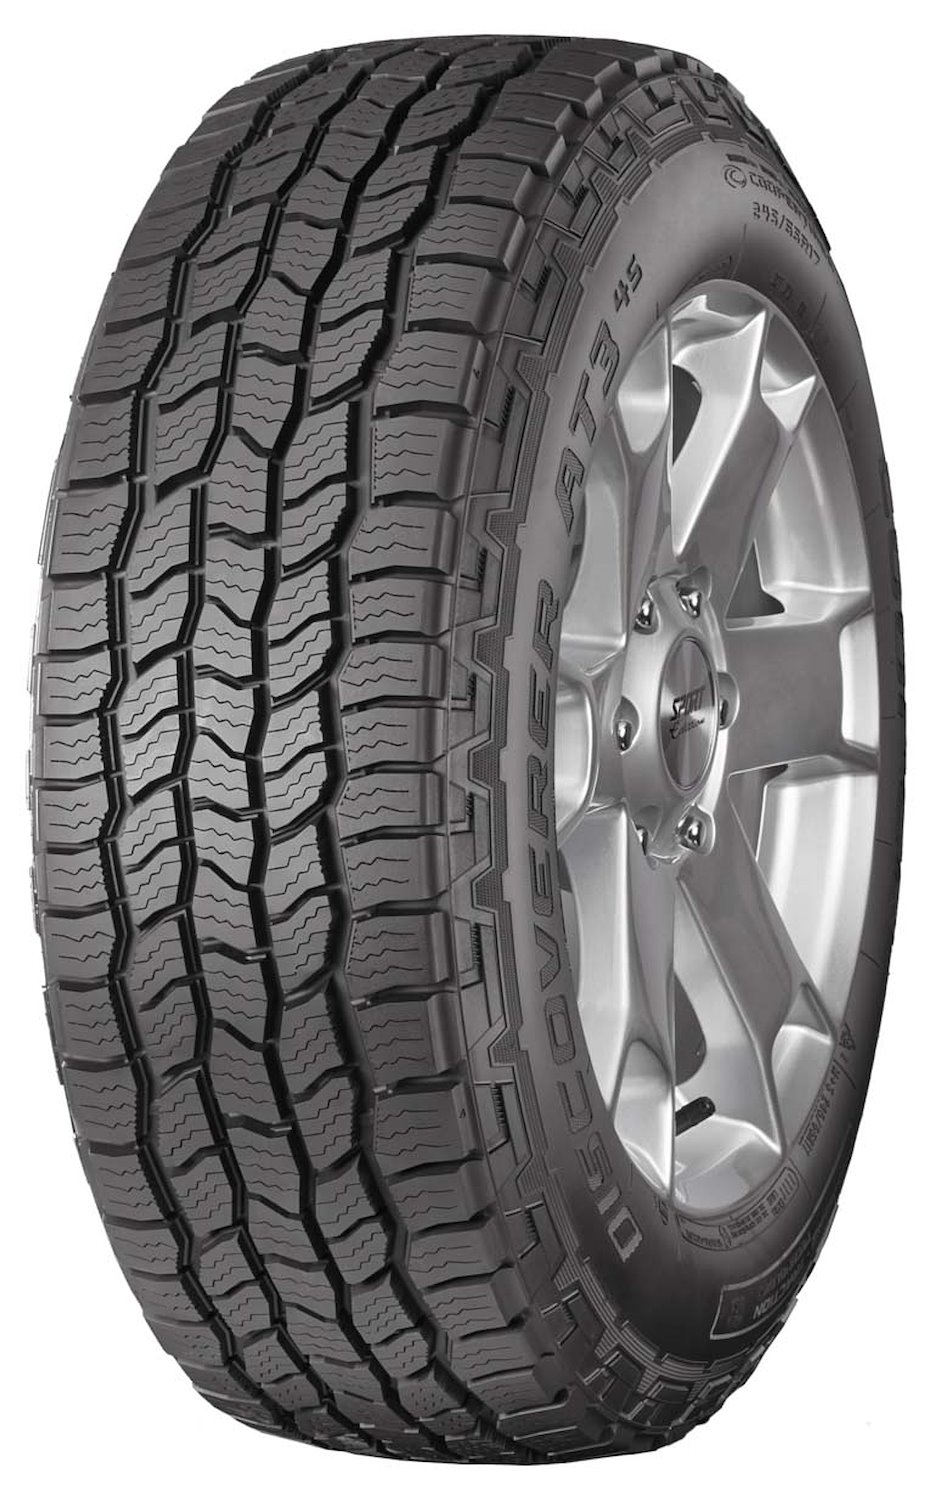 Discoverer AT3 4S All-Terrain Tire, 265/50R20